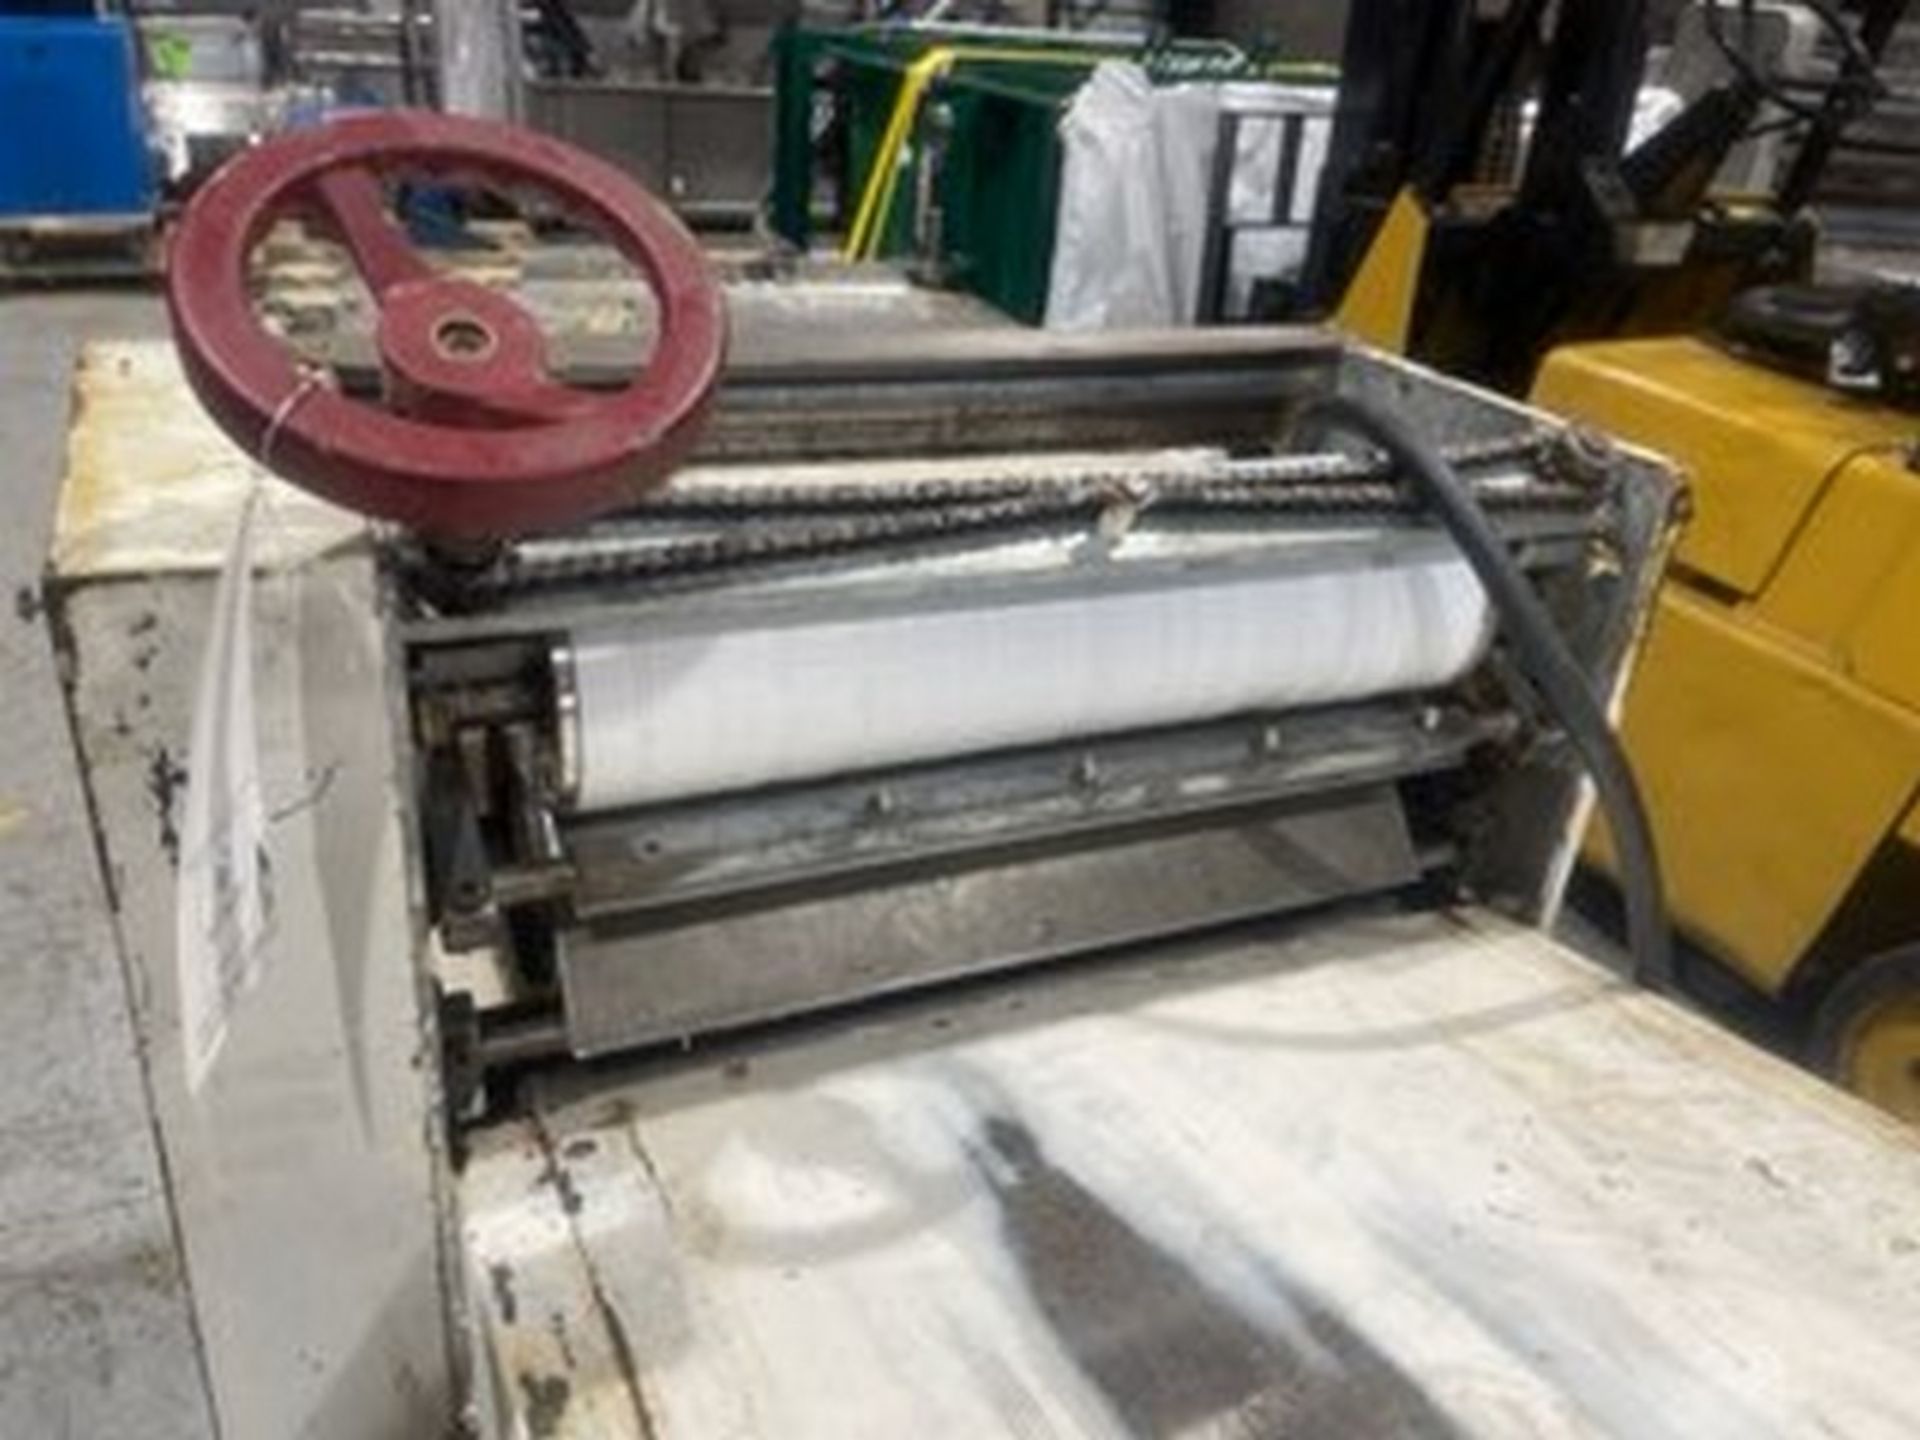 6-Roll Sheeter,Dims.: Aprox. 82" L x 18" W, with Rolls & Controls(INV#69244) (Located @ the MDG - Image 5 of 5